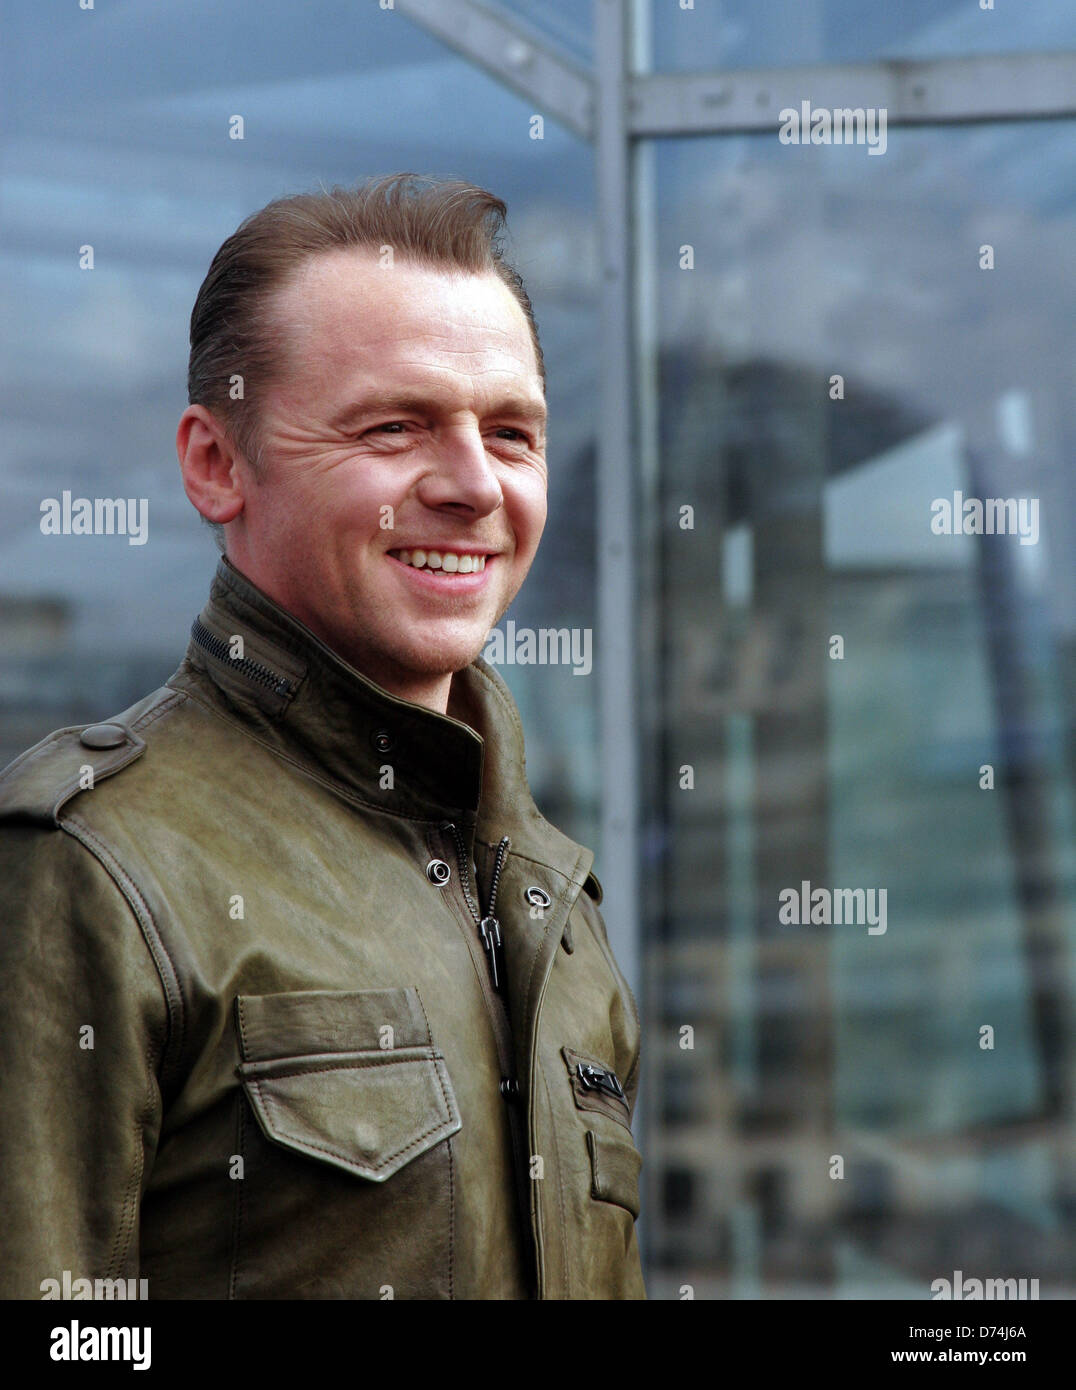 Berlin, Germany. 28th April, 2013. British actor Simon Pegg poses during the presentation of the movie 'Star Trek Into Darkness' in Berlin, Germany, 28 April 2013. The film will be released in Germany on 09 May 2013. Photo: XAMAX/dpa/dpa/Alamy Live News Stock Photo